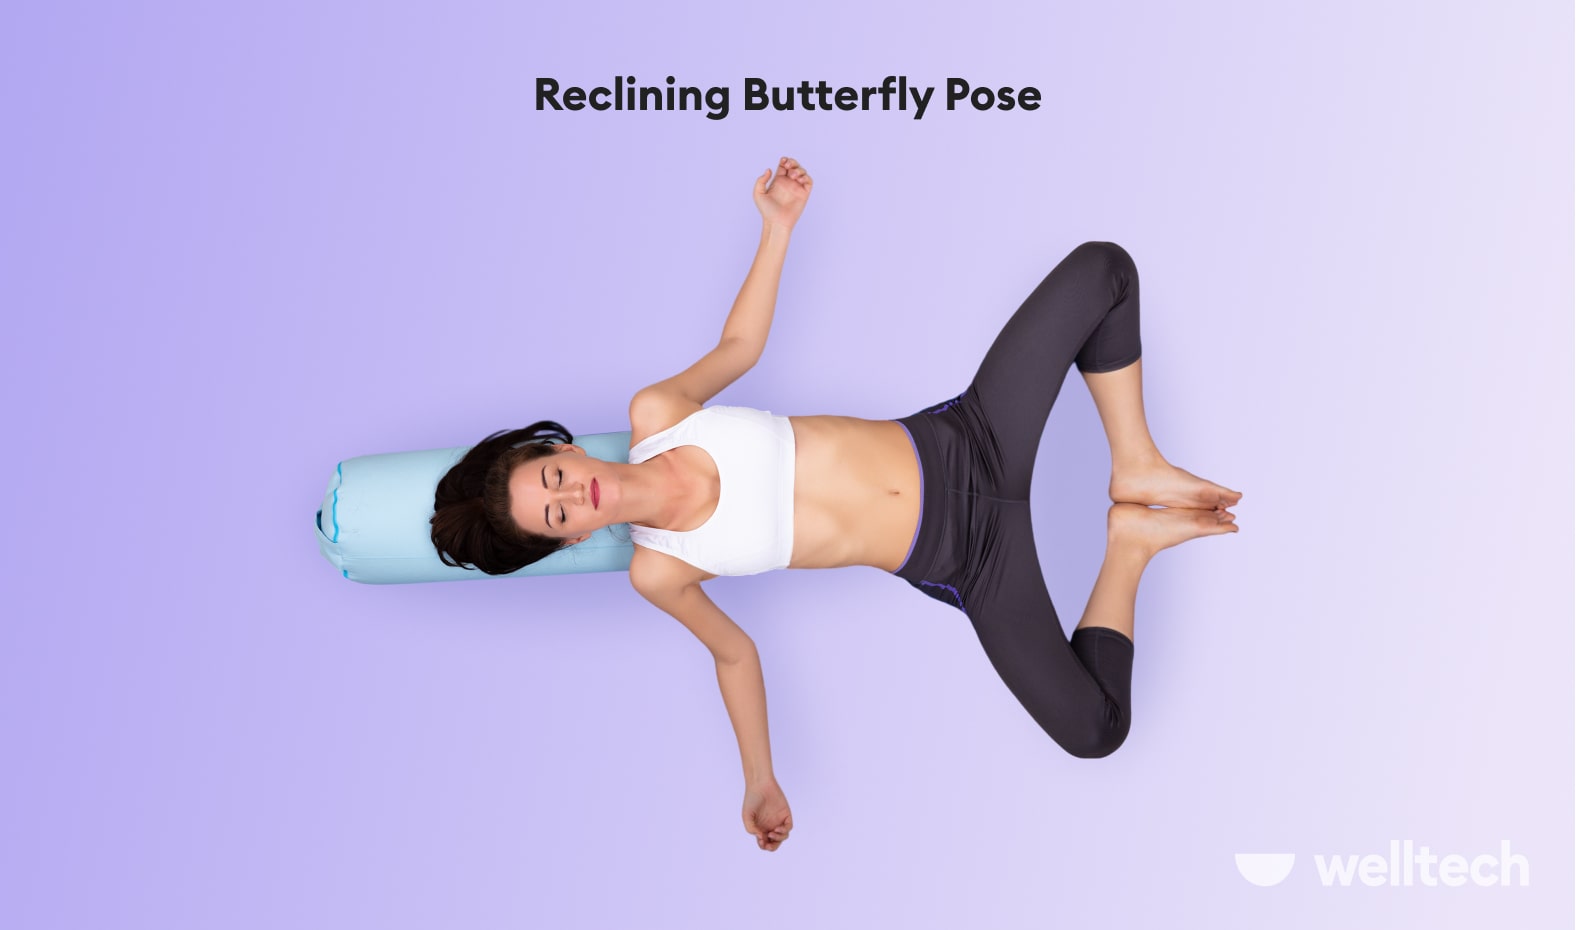 10 Relaxing Ways to Use a Yoga Bolster - Spoiled Yogi